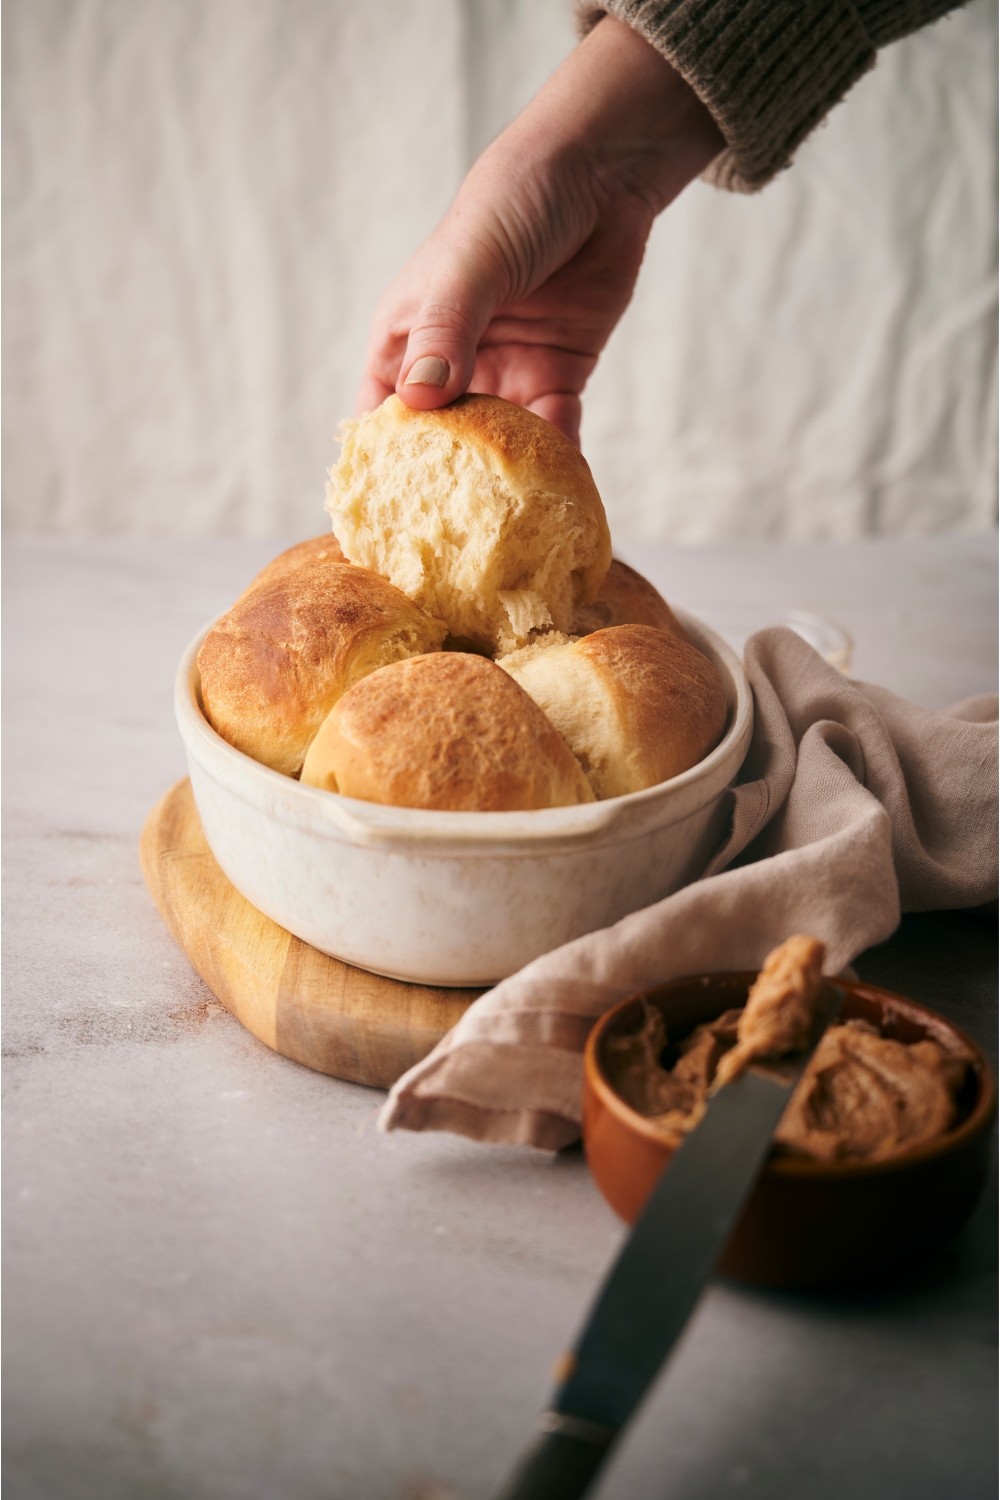 Hand grabbing a dinner roll from a white baking dish.